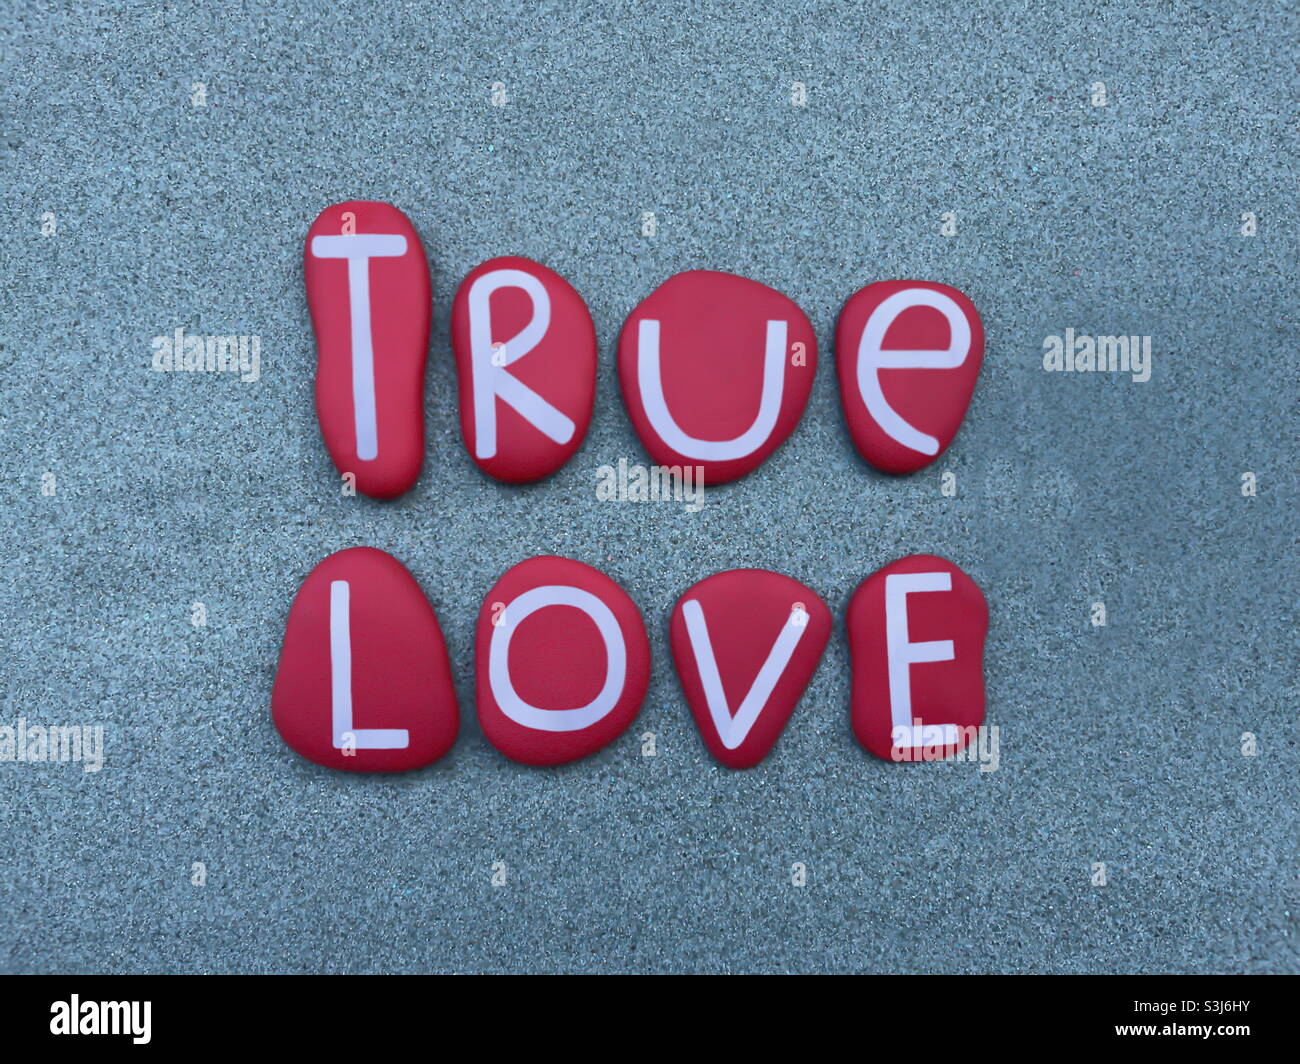 True love, creative message composed with red hand painted stone letters over green sand Stock Photo